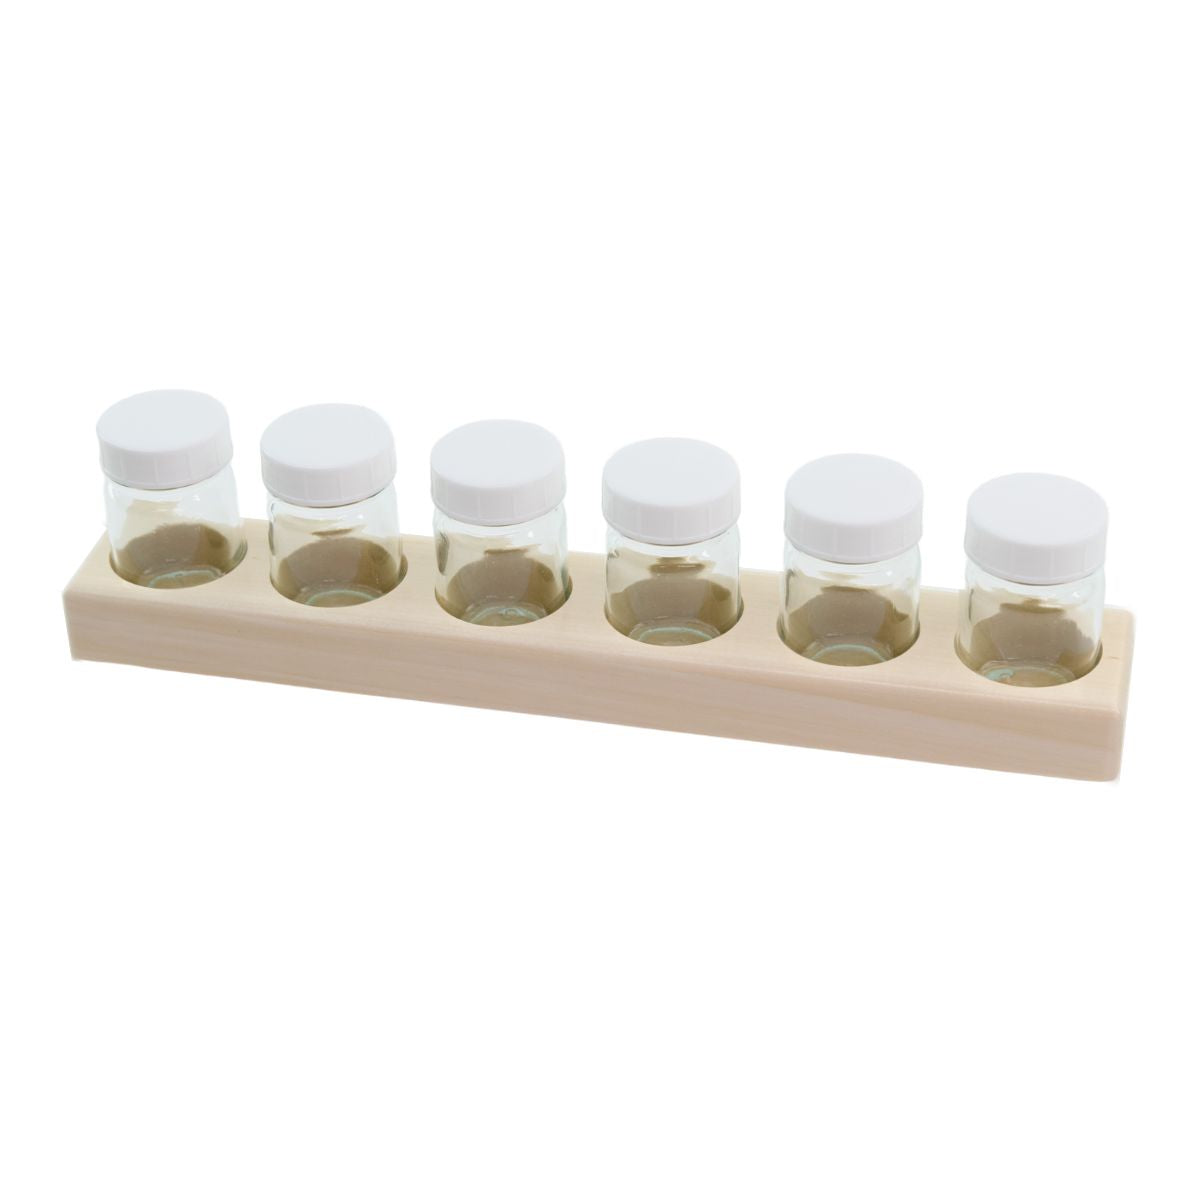 25915002WJ Glass Jars with Wooden Paint Holder